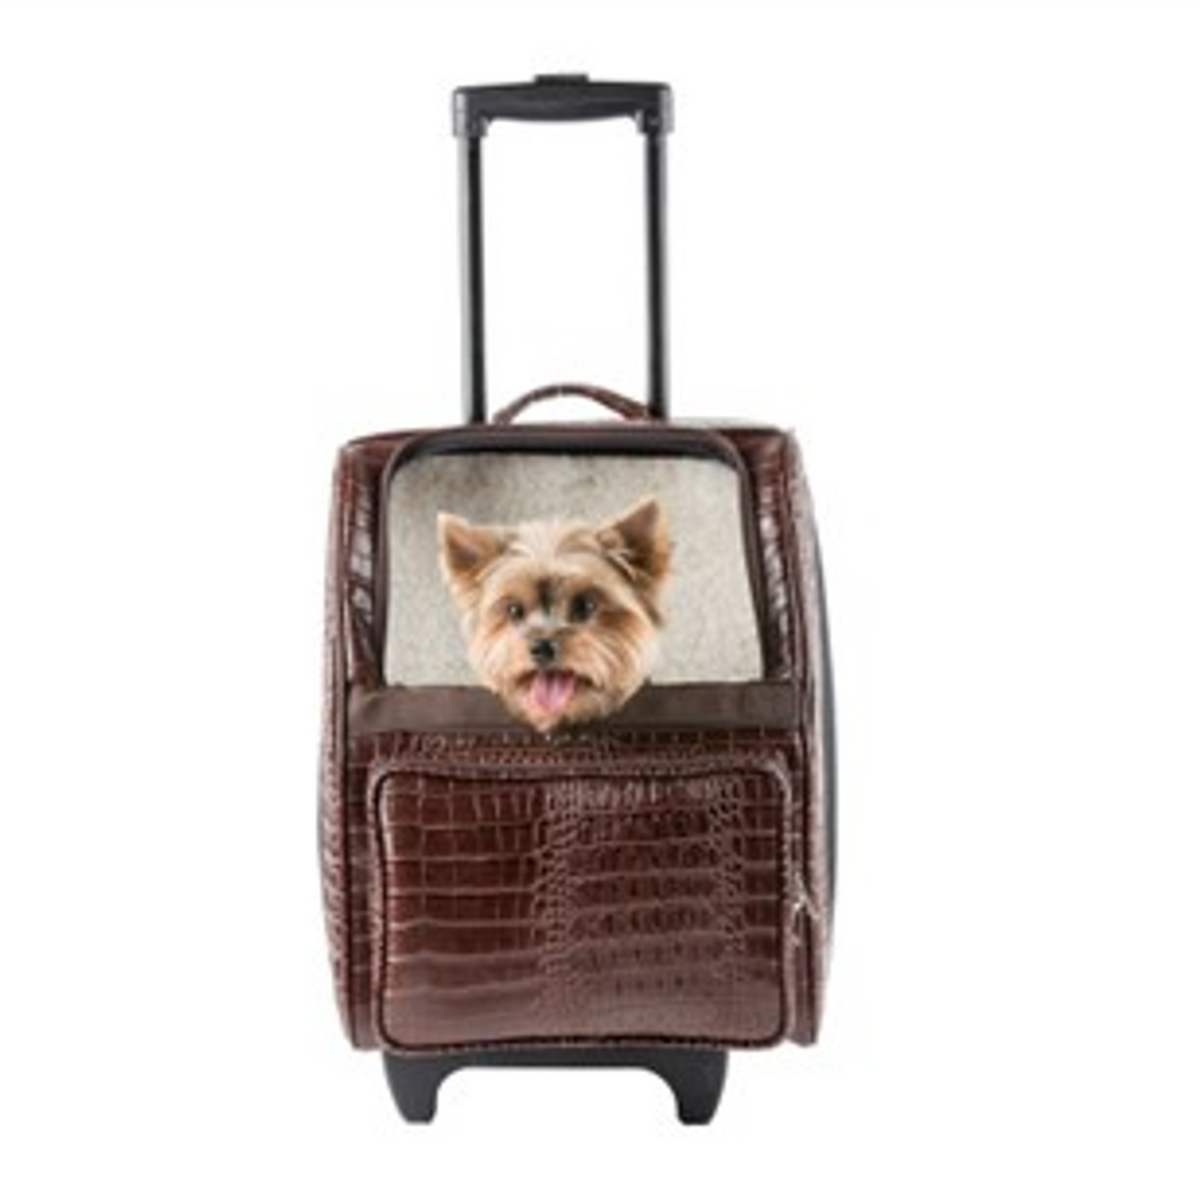 Rio Brown Croc Bag on Wheels - 3 Red Rovers